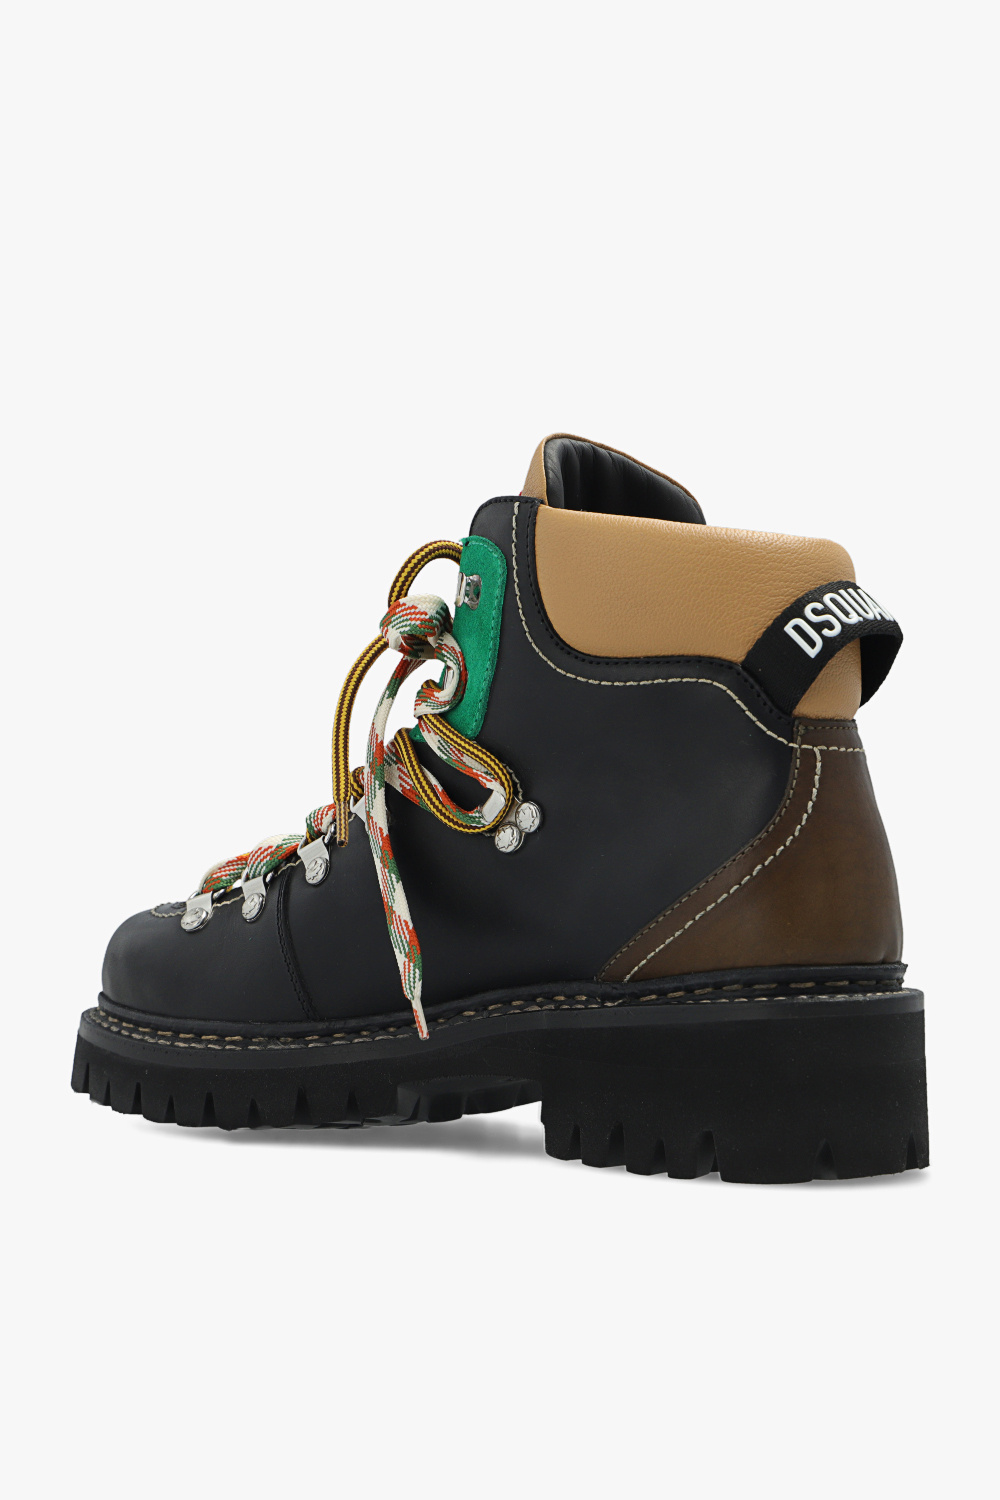 Dsquared2 ‘Hiking’ ankle boots